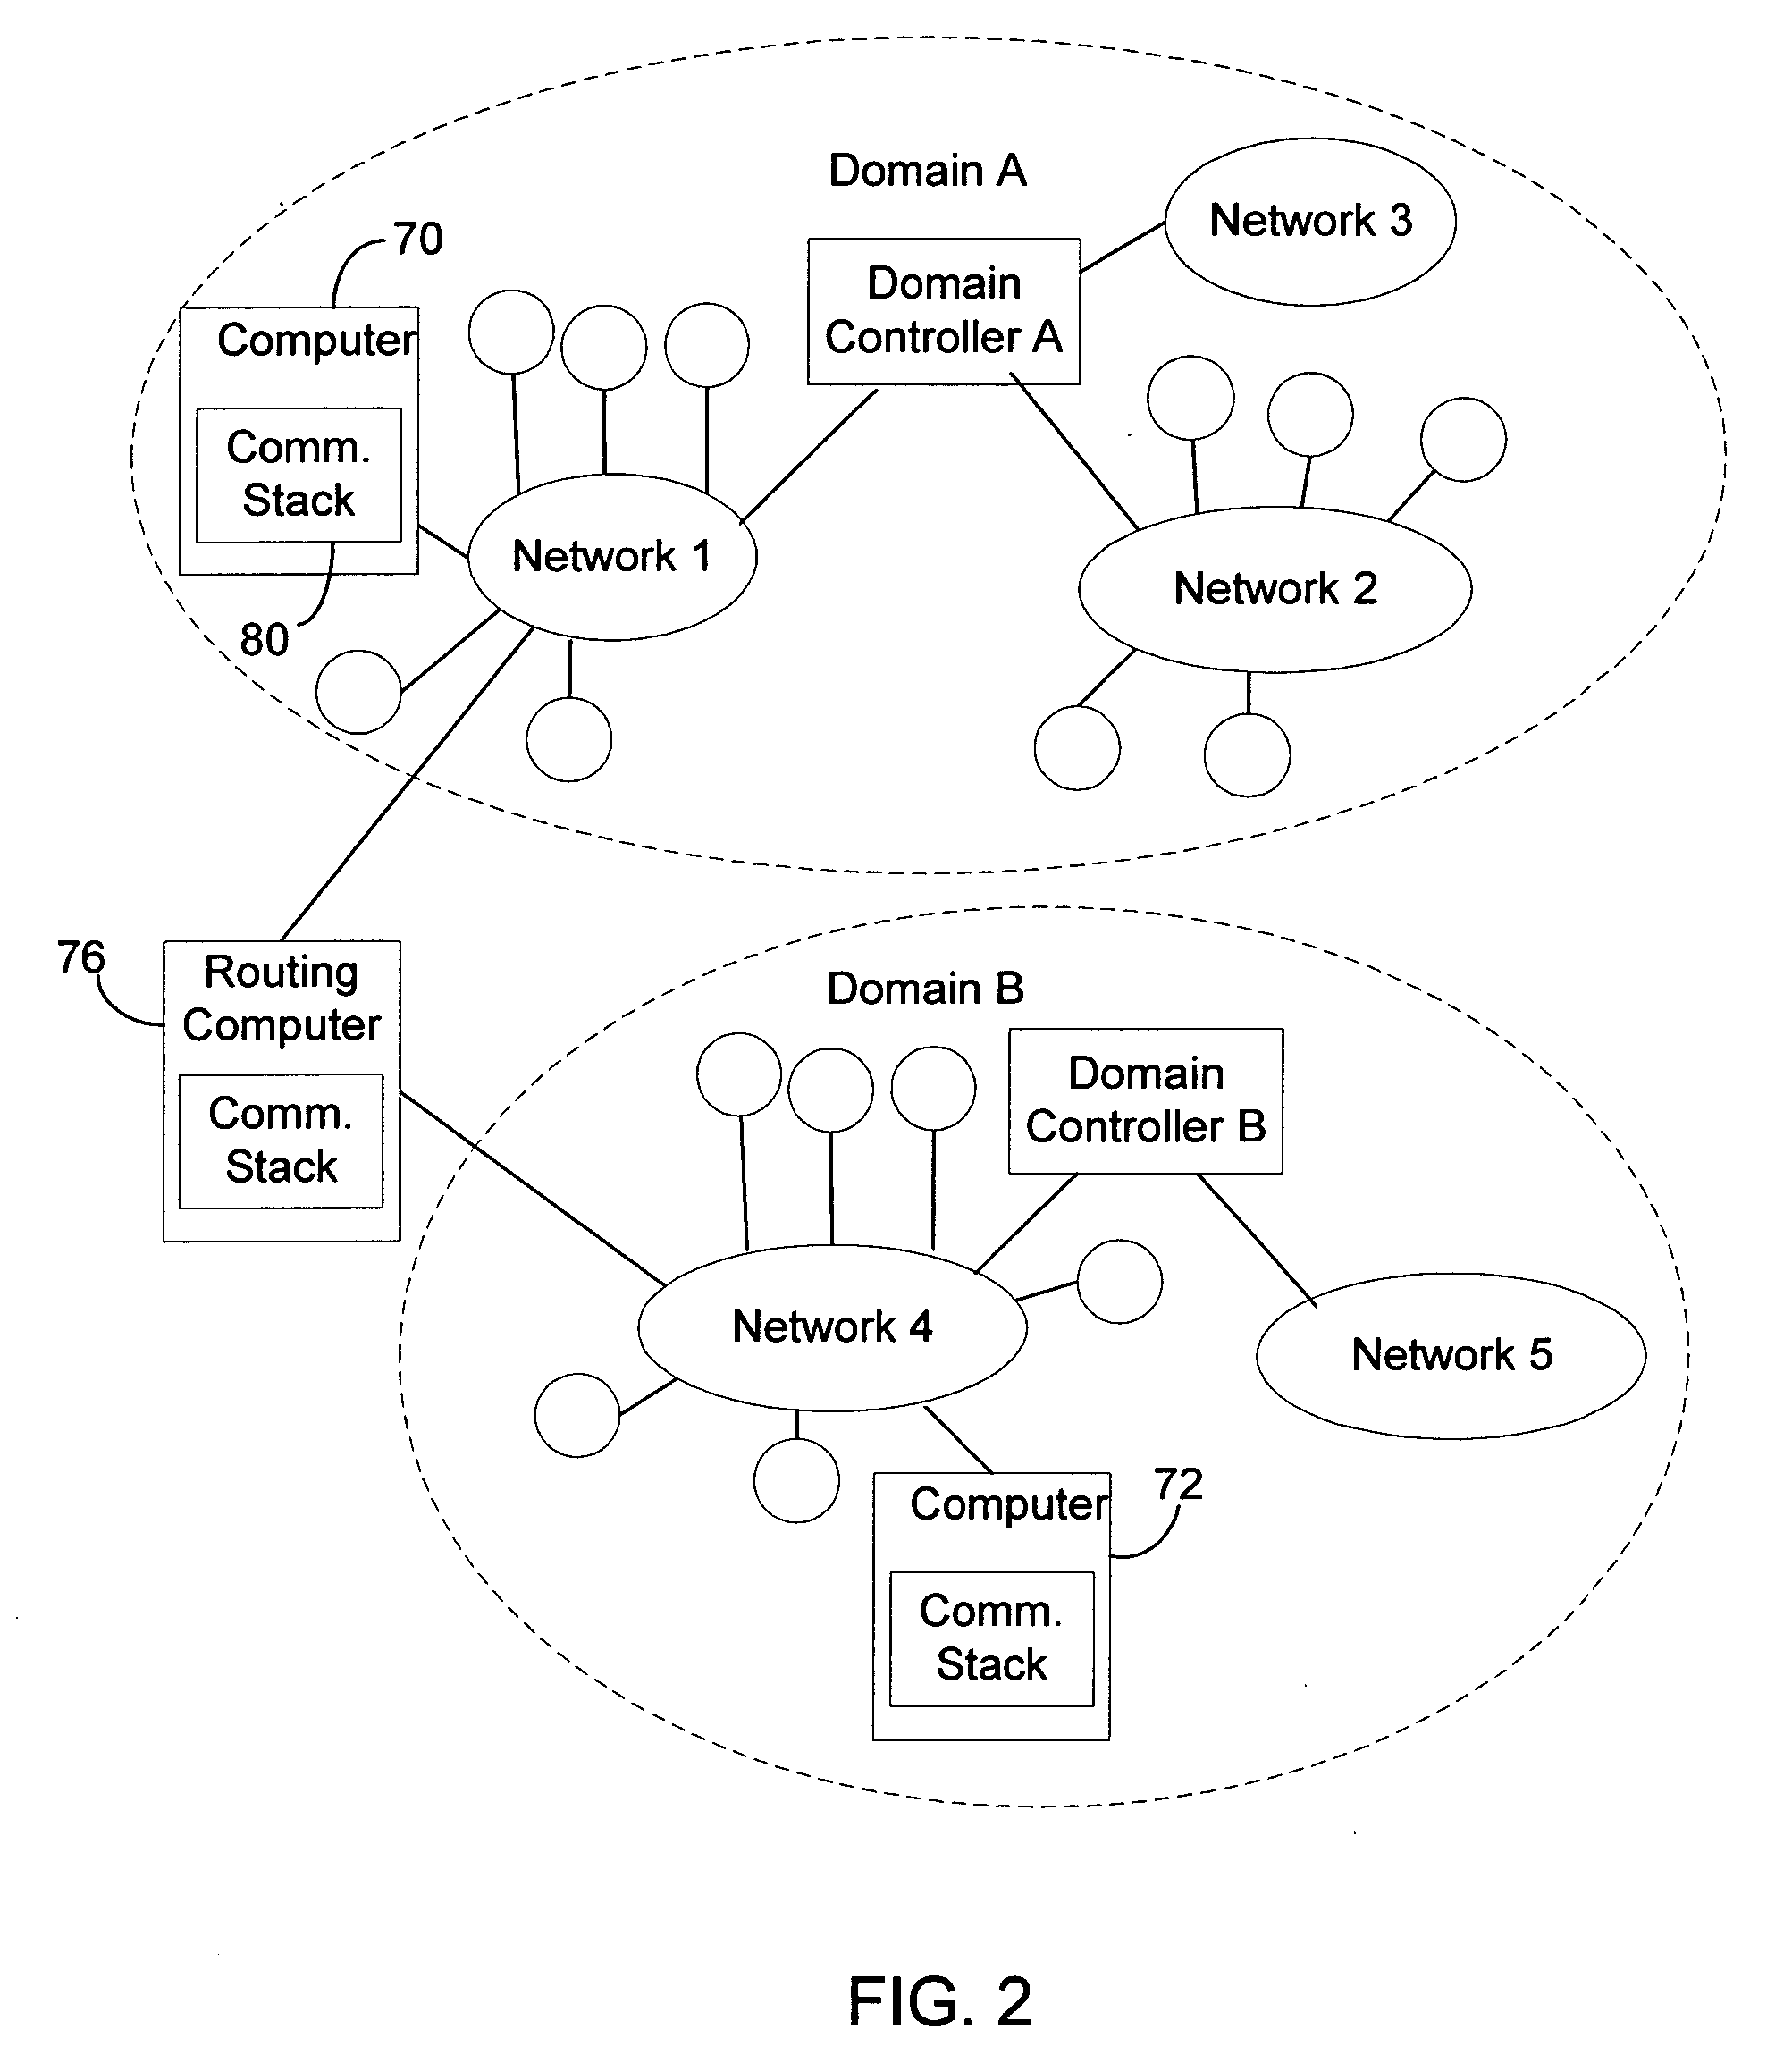 Communication stack for network communication and routing